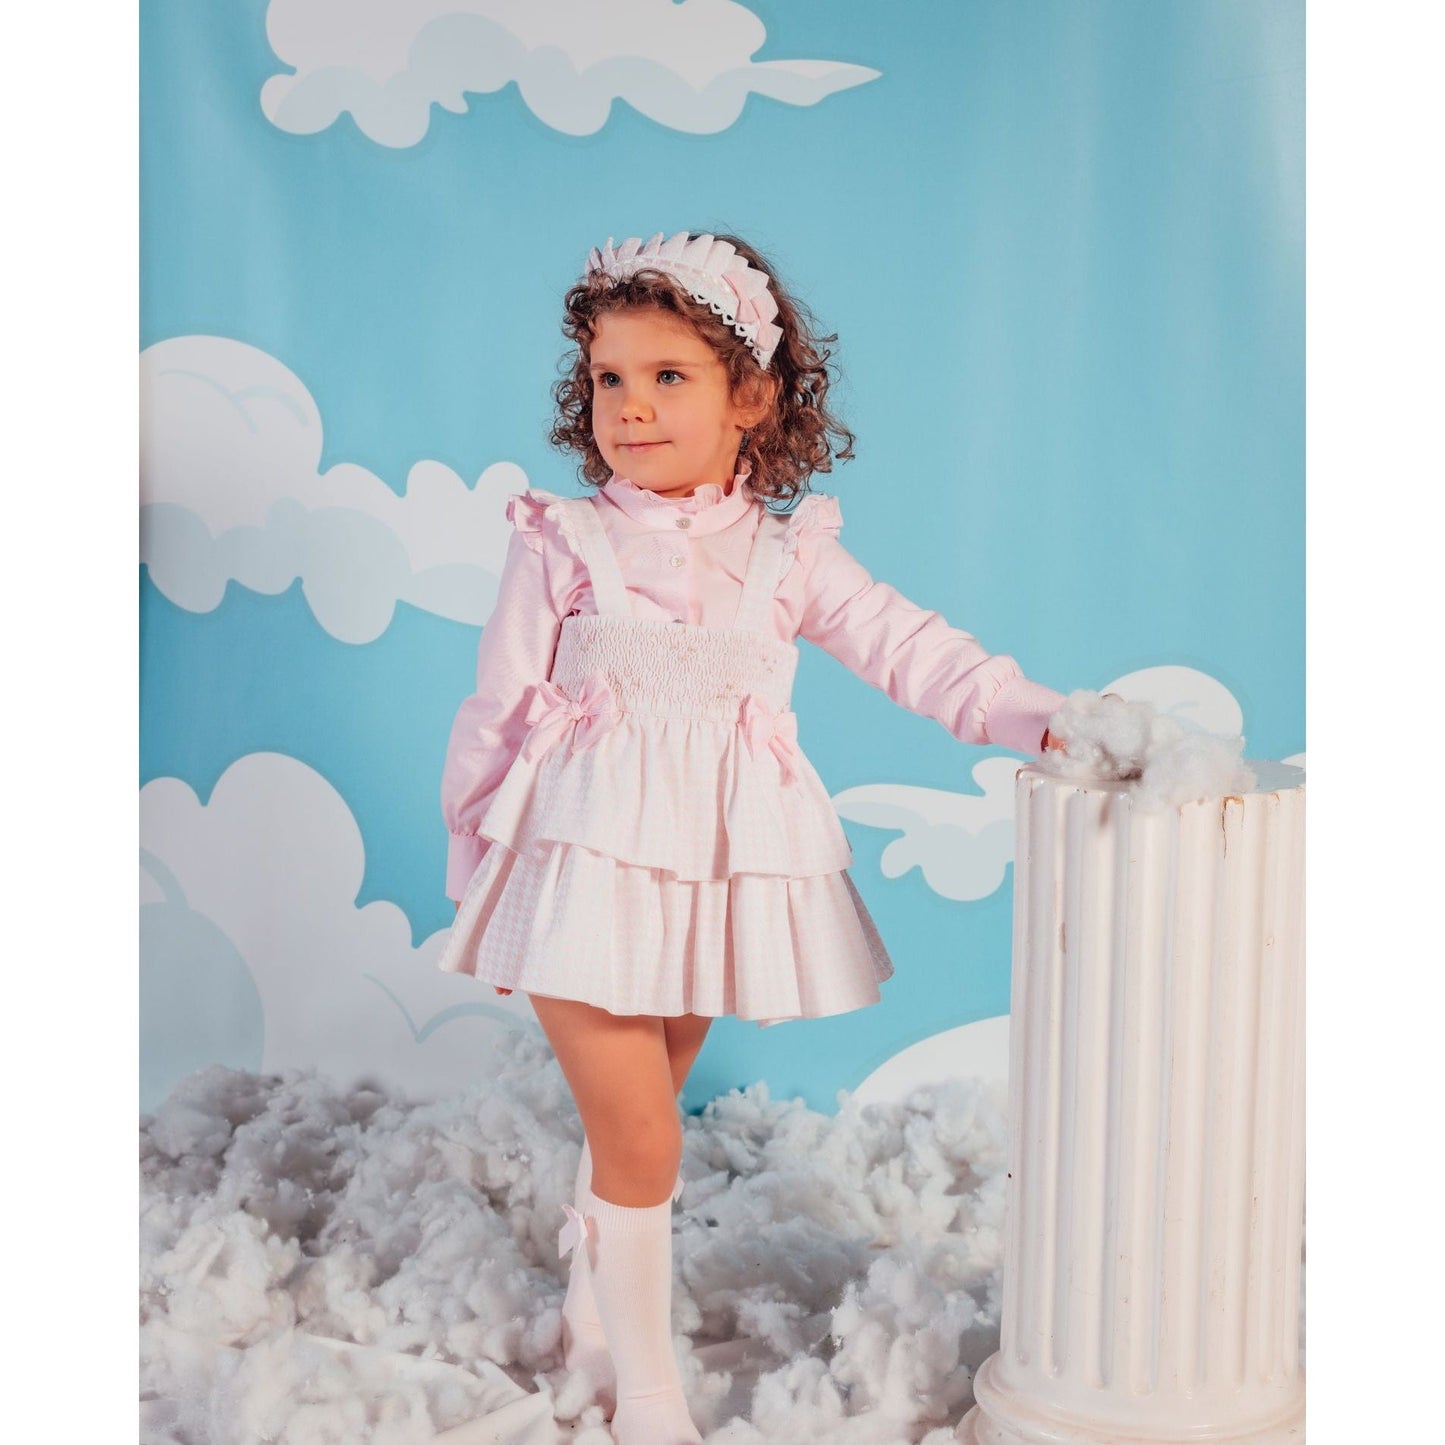 Pink Dogtooth Dress And Blouse 3279 - Lala Kids 